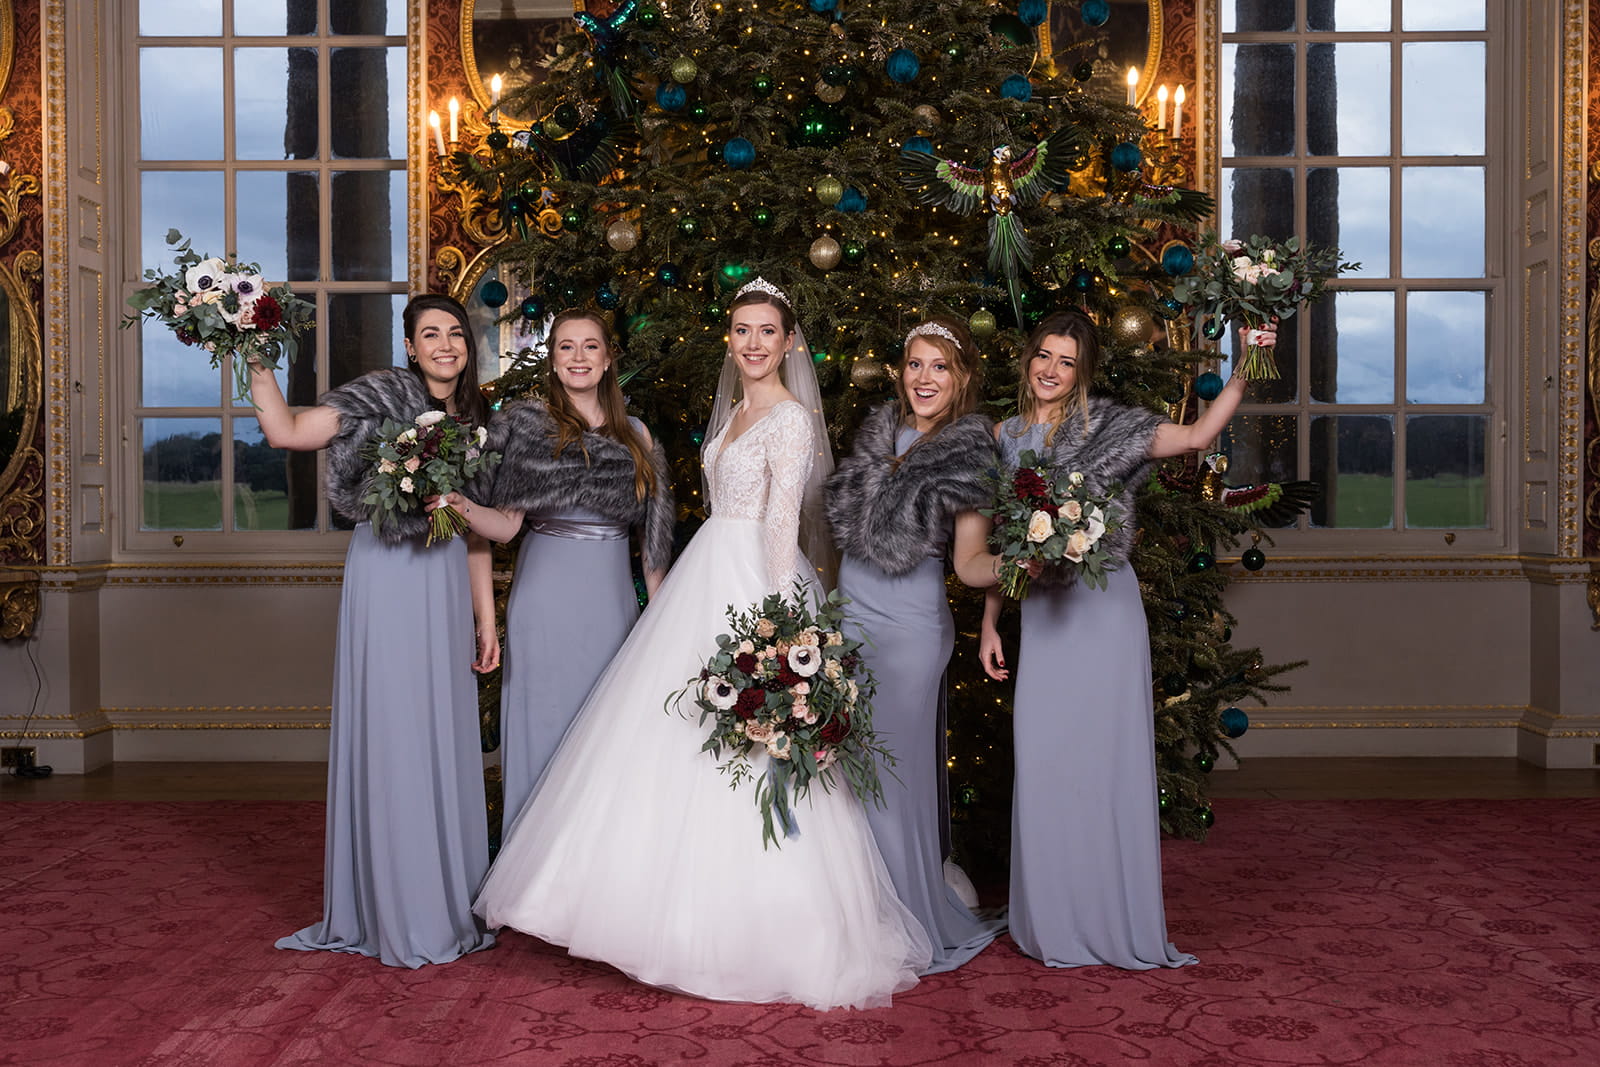 Wedding Bridal Party in front of Christmas Tree